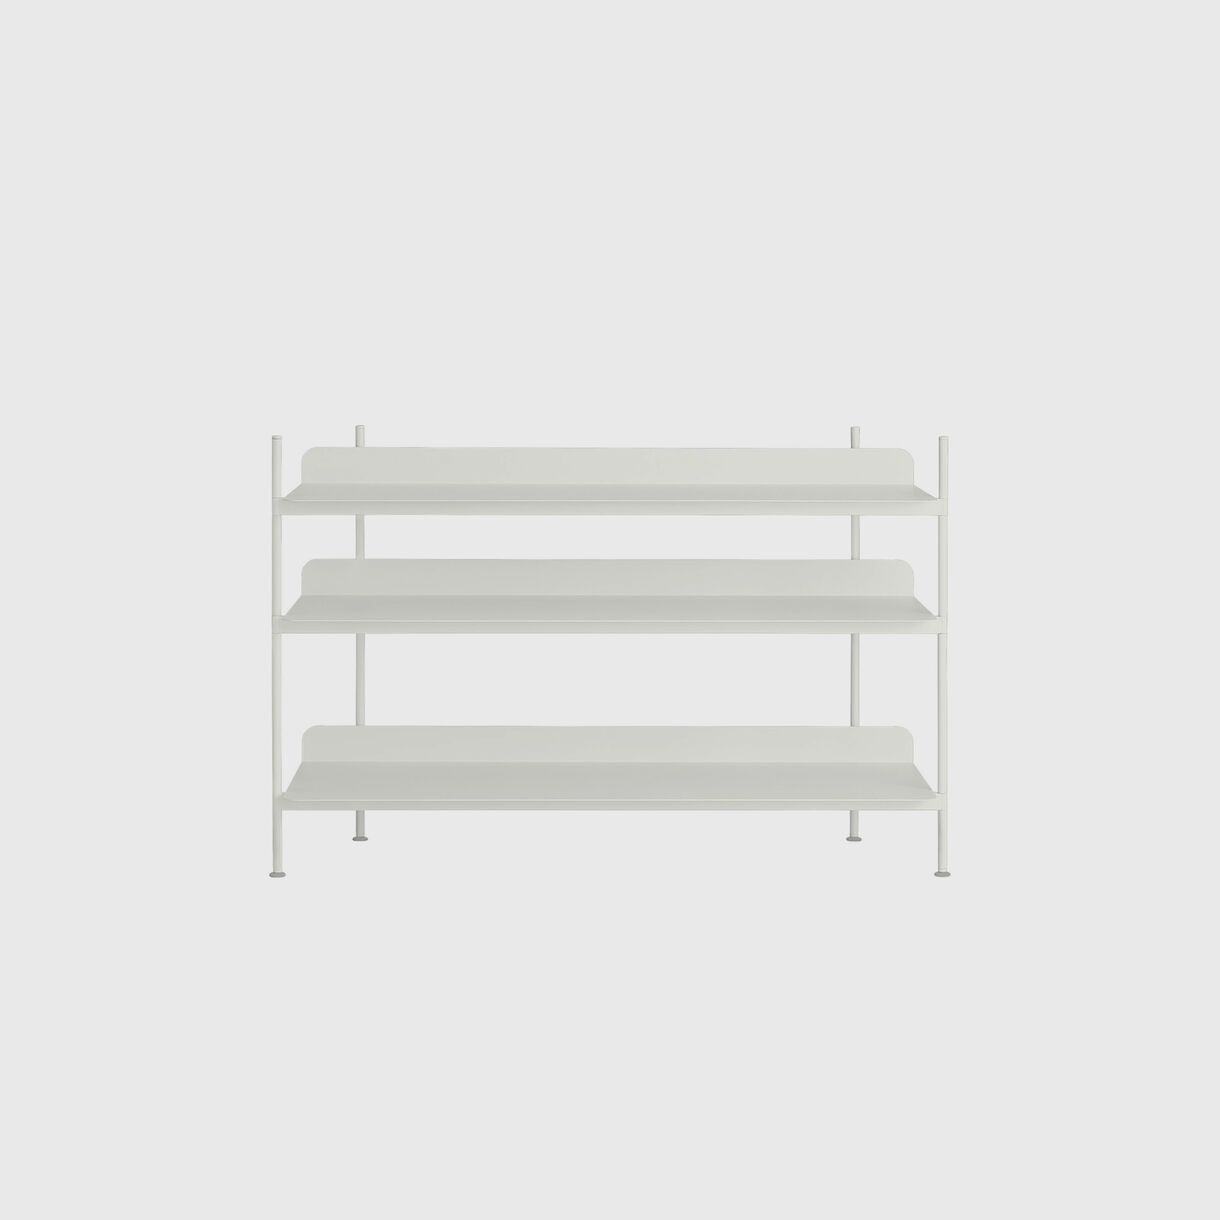 Compile Shelving System, Configuration 2, White